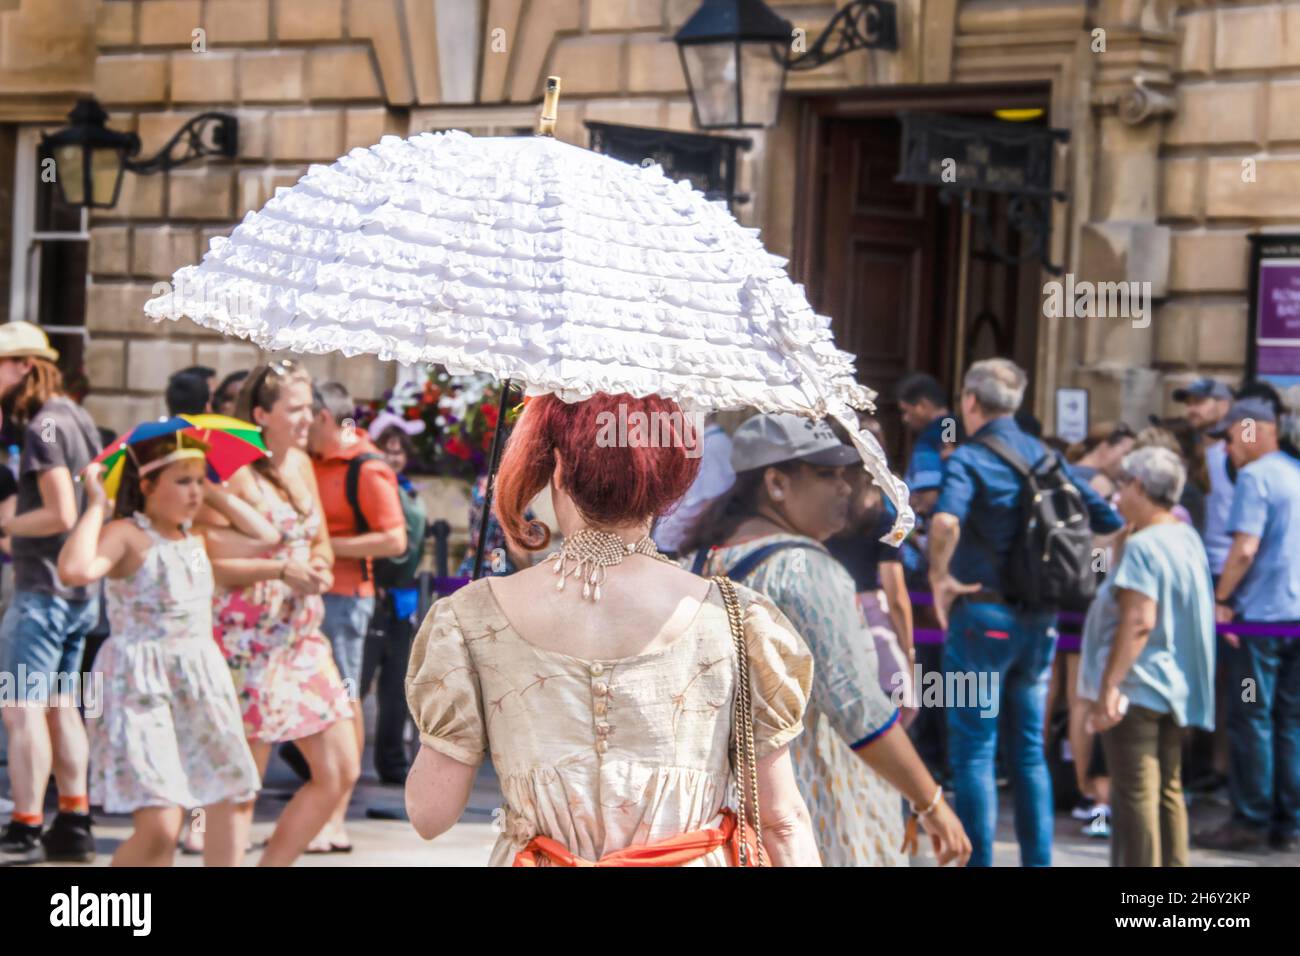 2019 07 25 Bath UK back of woman dressed in Regency Jane Austen period clothing with white ruffled parasol walking among crowd of tourists Stock Photo